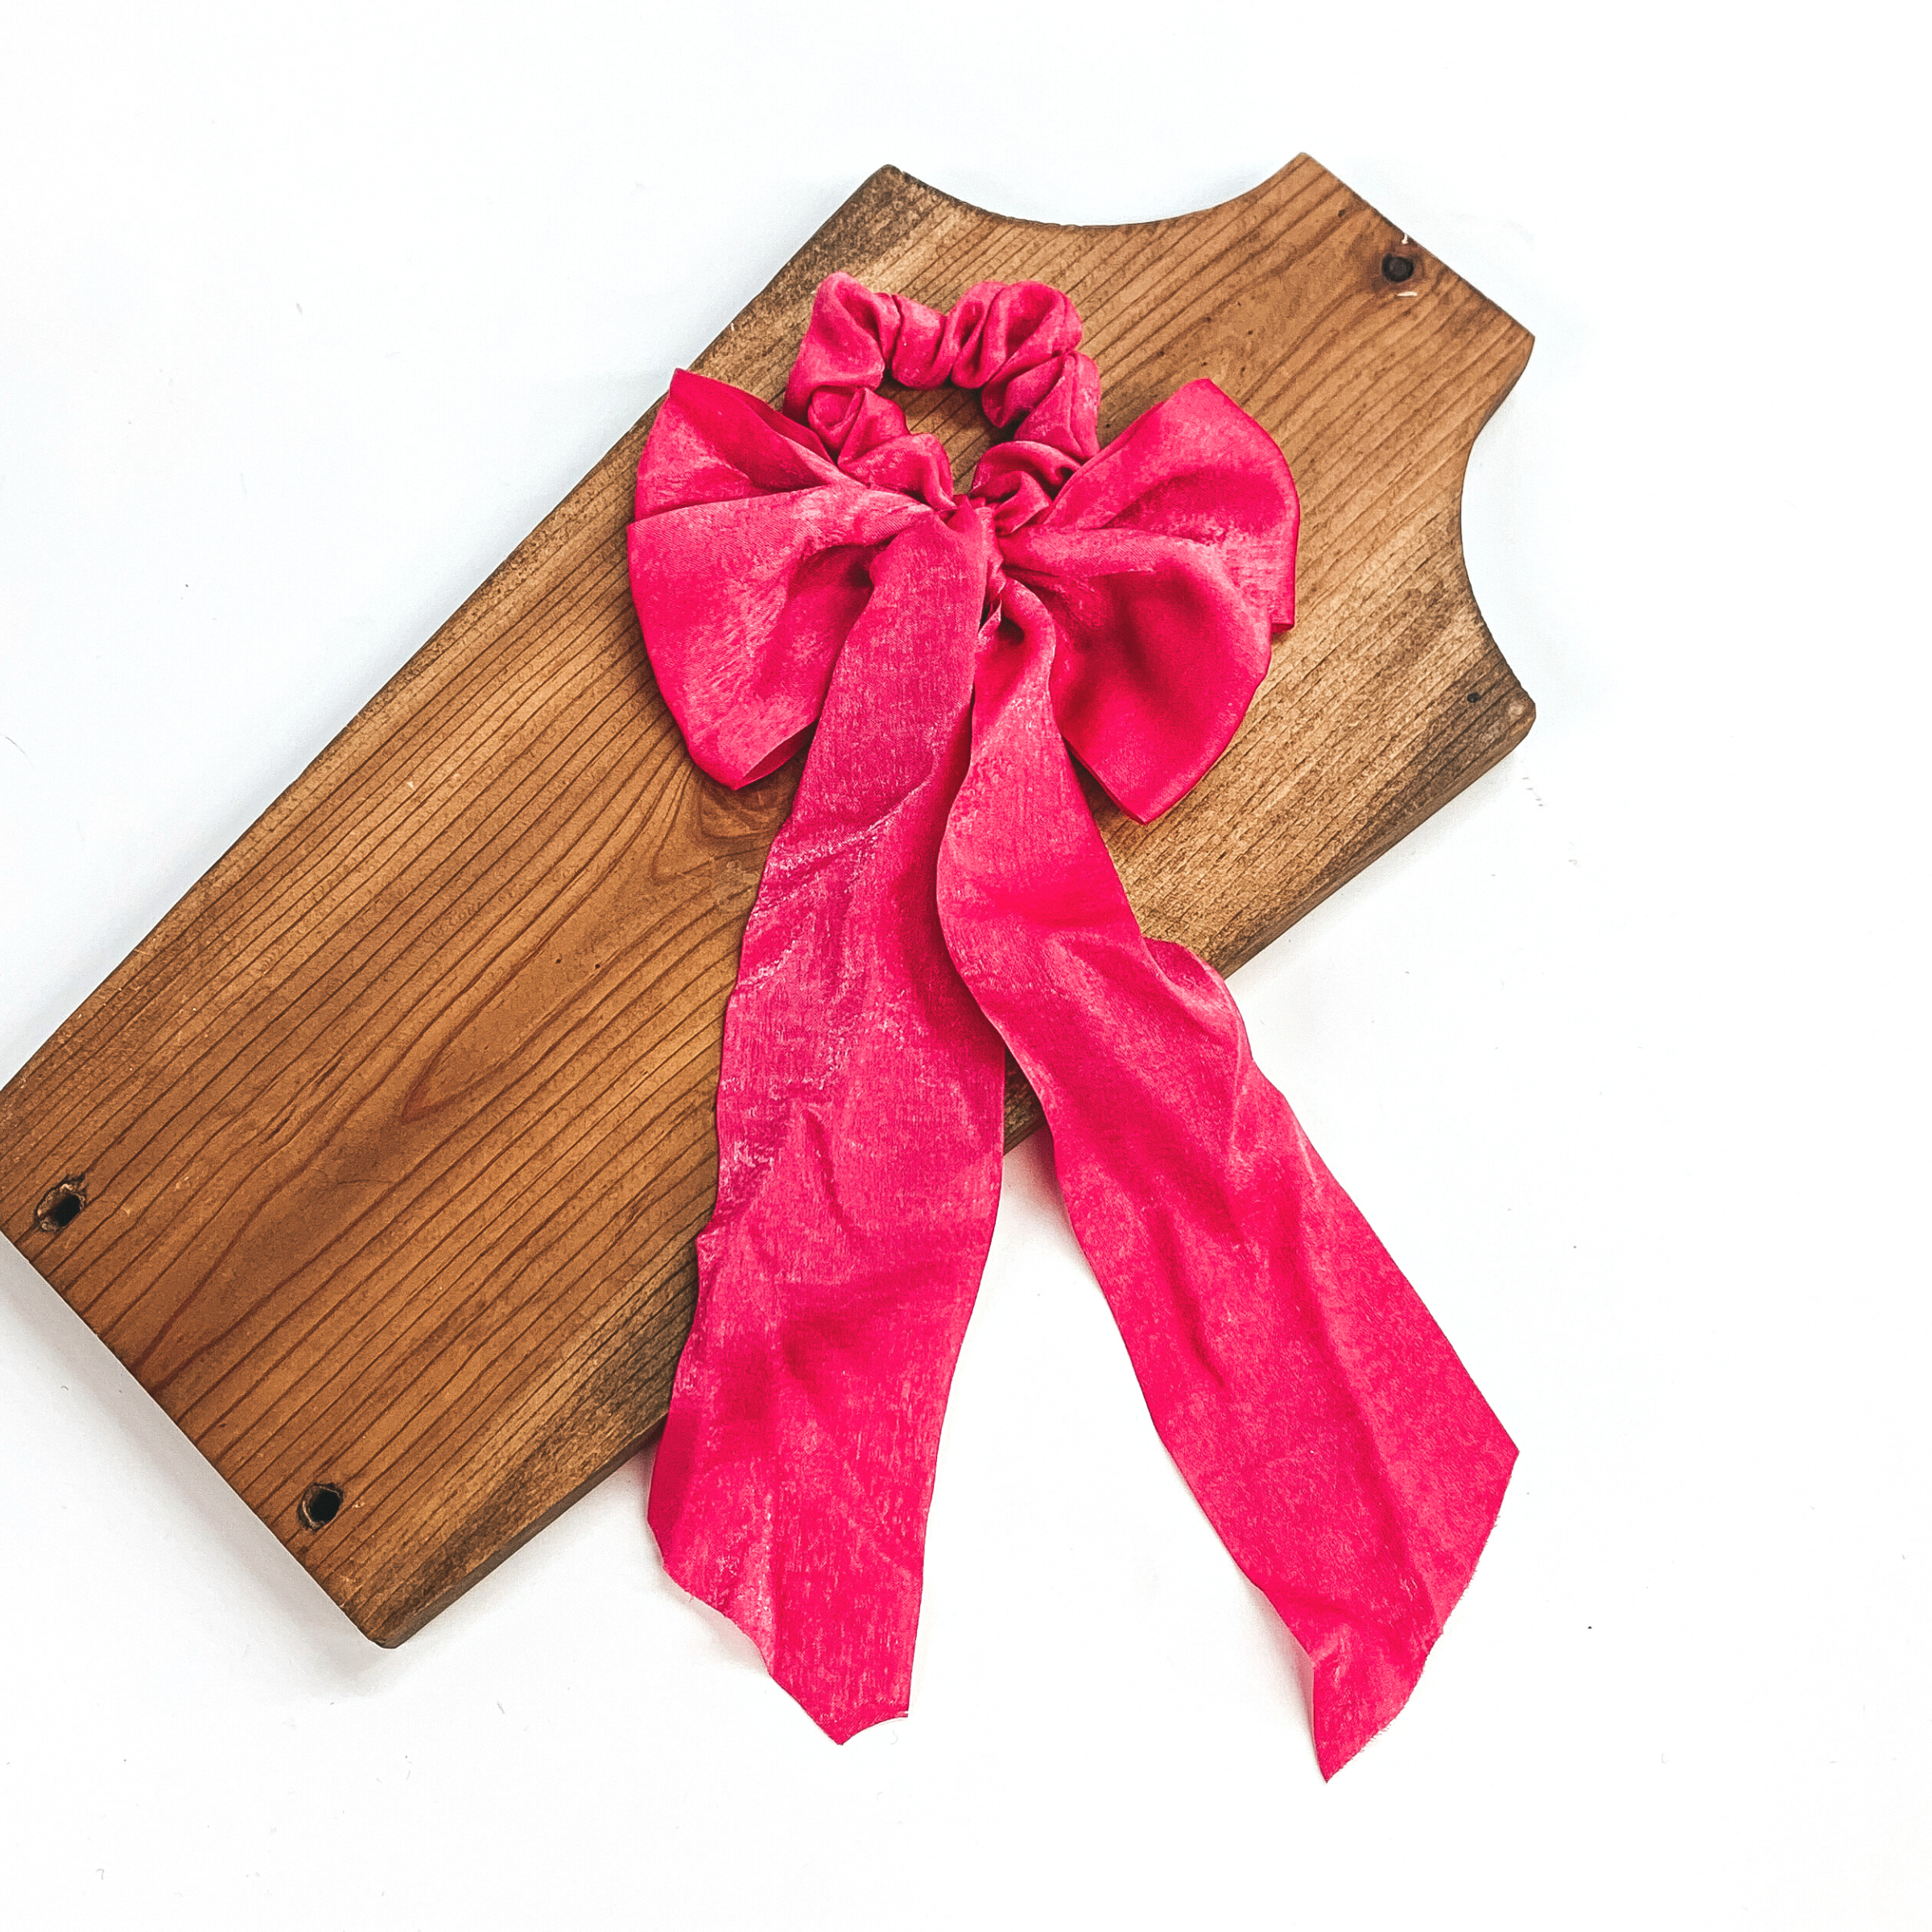 This is a hot pink satin scrunchie with a long bow, this scrunchie is taken on  a brown necklace board and on a white background.